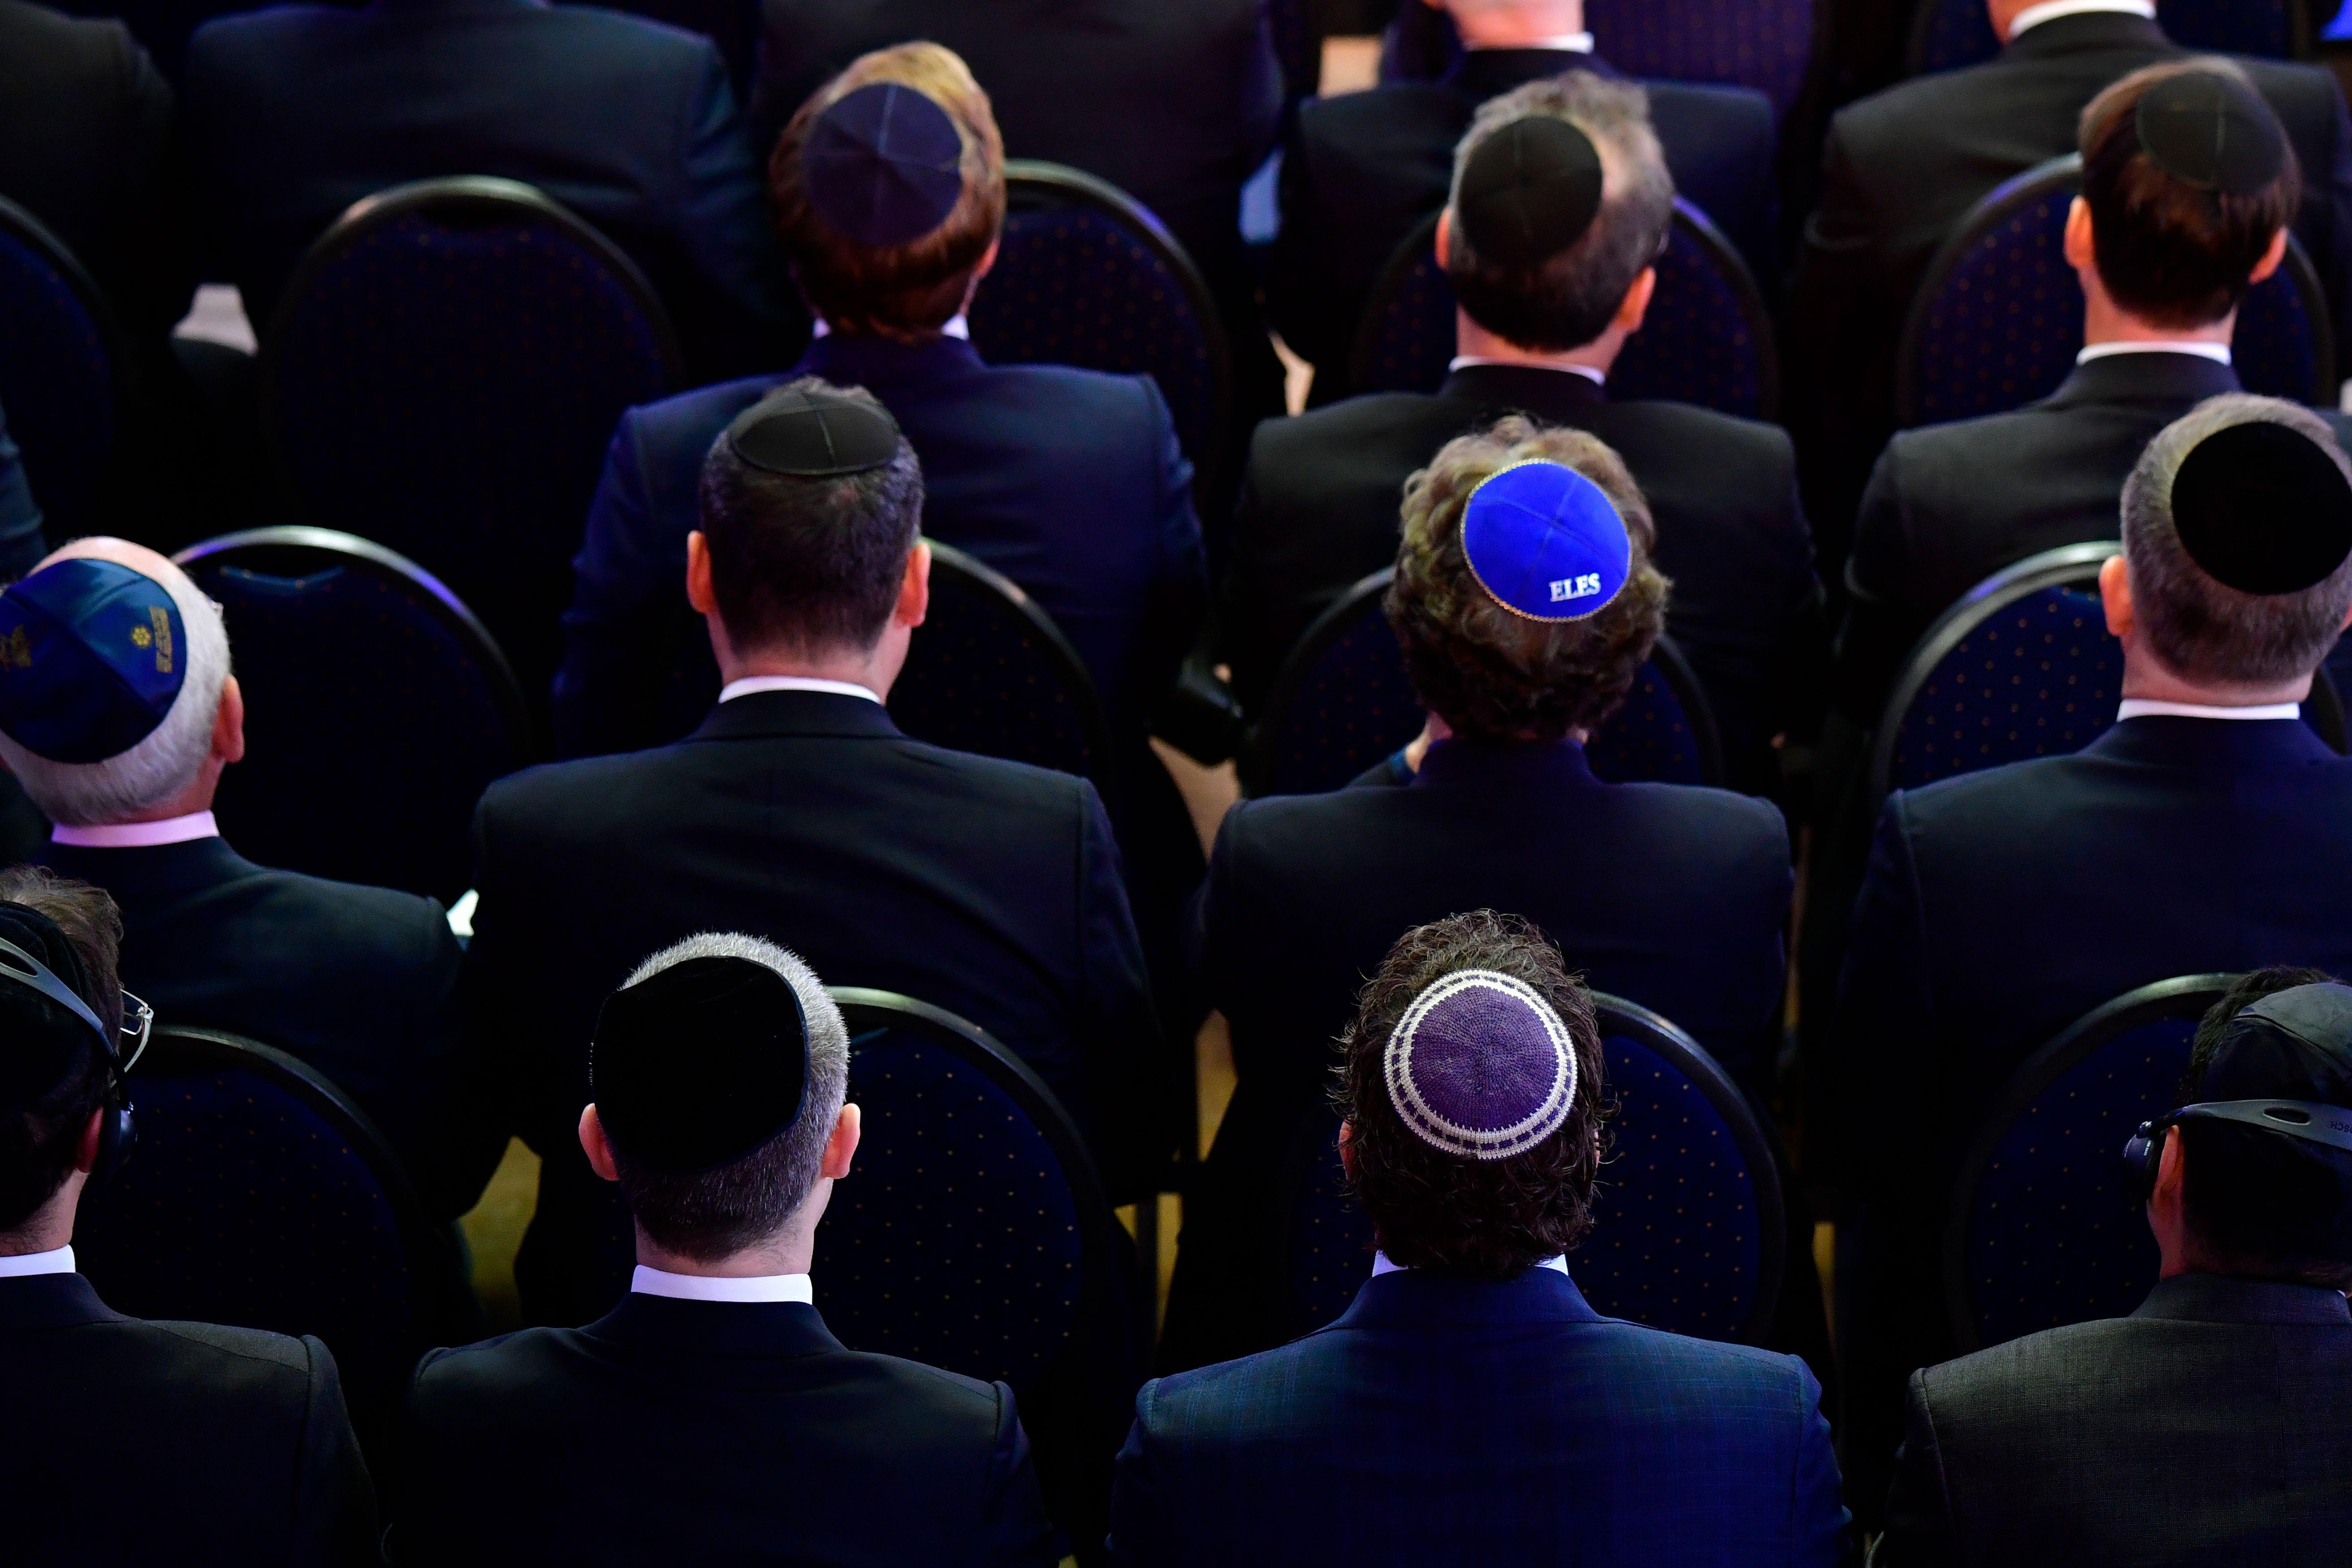 Men wearing kippah skullcaps attend an ordination ceremony at the Bet Zion synagogue in Berlin on October 8, 2018. 